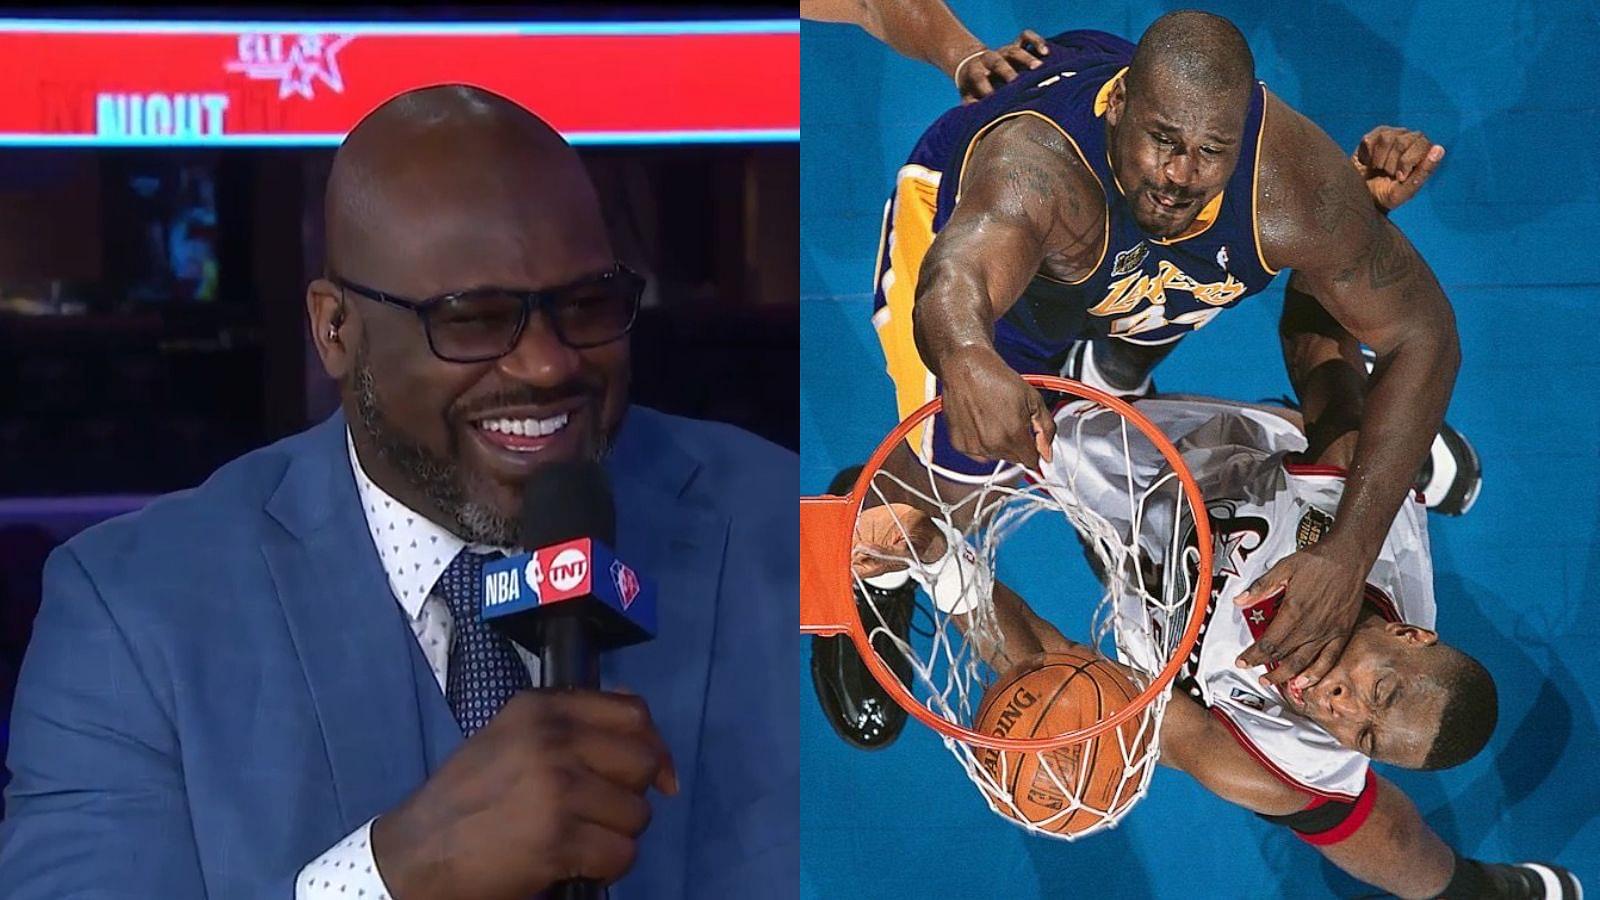 Shaquille O’Neal made his $400 million fortune and legendary NBA career by eating alive elite players like Dikembe Mutombo for breakfast